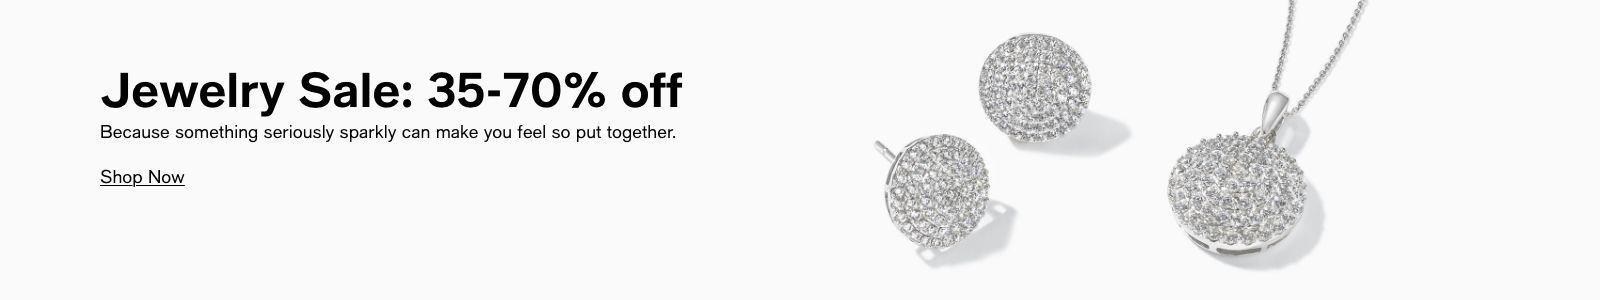 Jewelry Sale: 35-70% off, Because something seriously sparkly can make you feel so put together. Shop Now